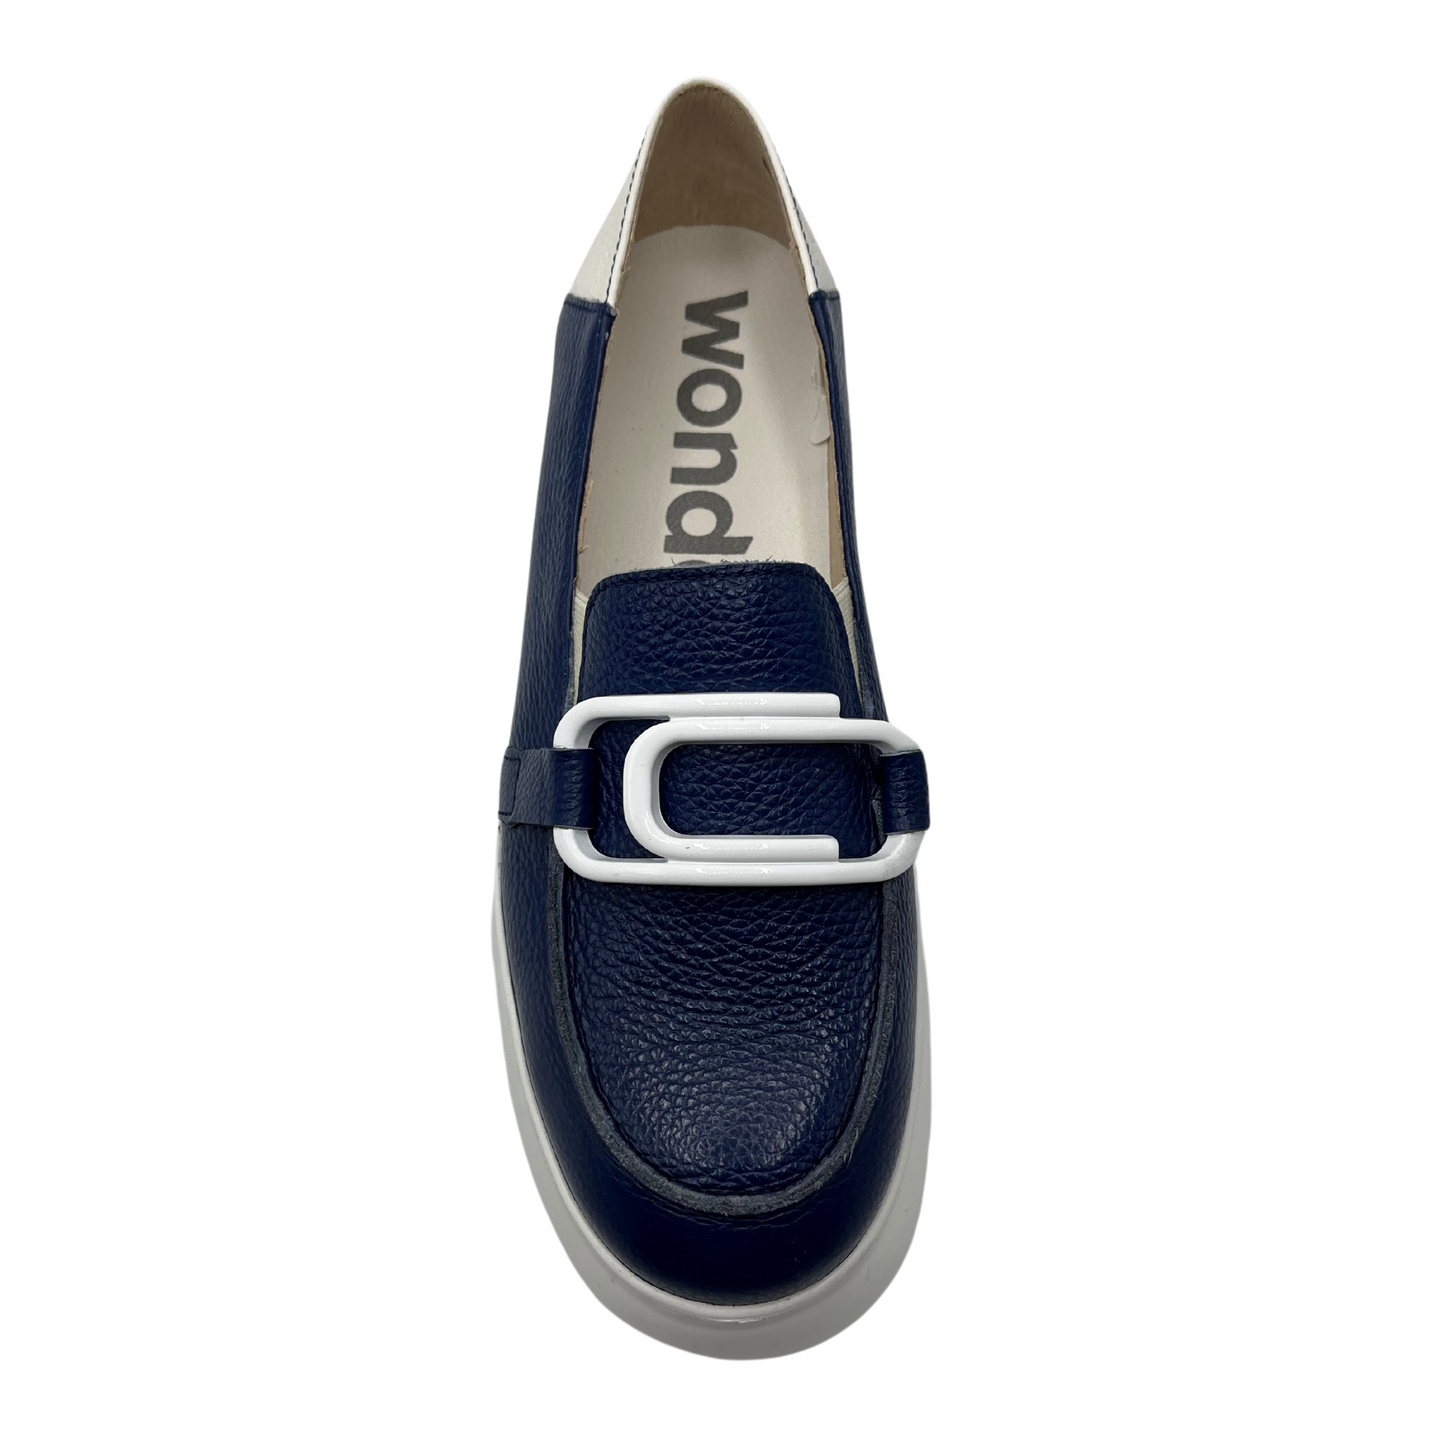 Top facing view of navy and white leather loafer with white rubber platform sole and large white paperclip detail